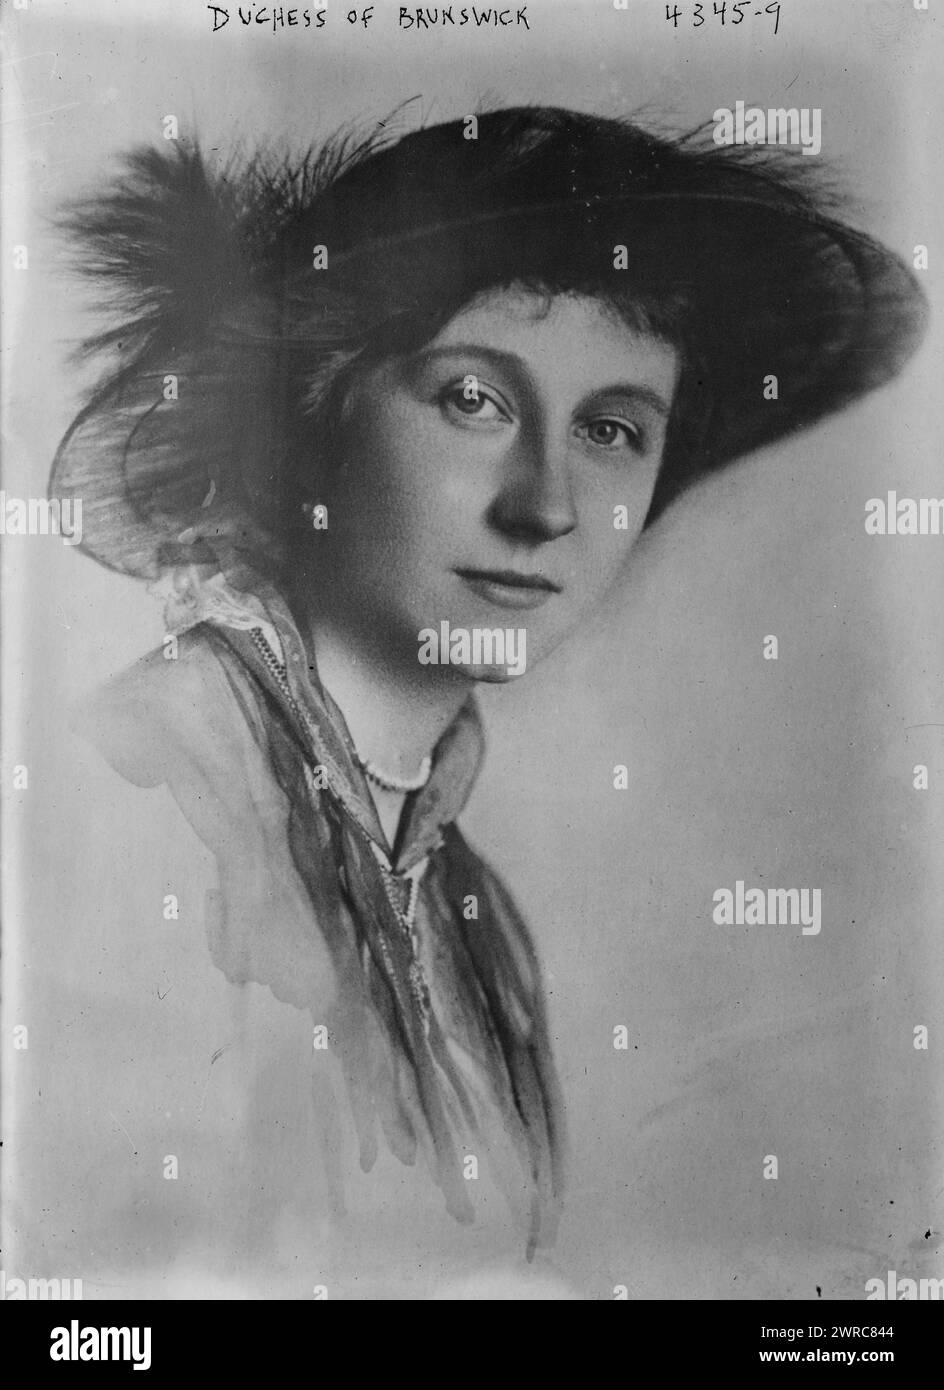 Duchess of Brunswick, Photograph shows Victoria Louise of Prussia (1892-1980), the daughter of German Emperor Wilhelm II and Empress Augusta Victoria. She became Duchess of Brunswick after her 1913 marriage to Prince Ernest Augustus of Hanover., between ca. 1915 and ca. 1920, Glass negatives, 1 negative: glass Stock Photo